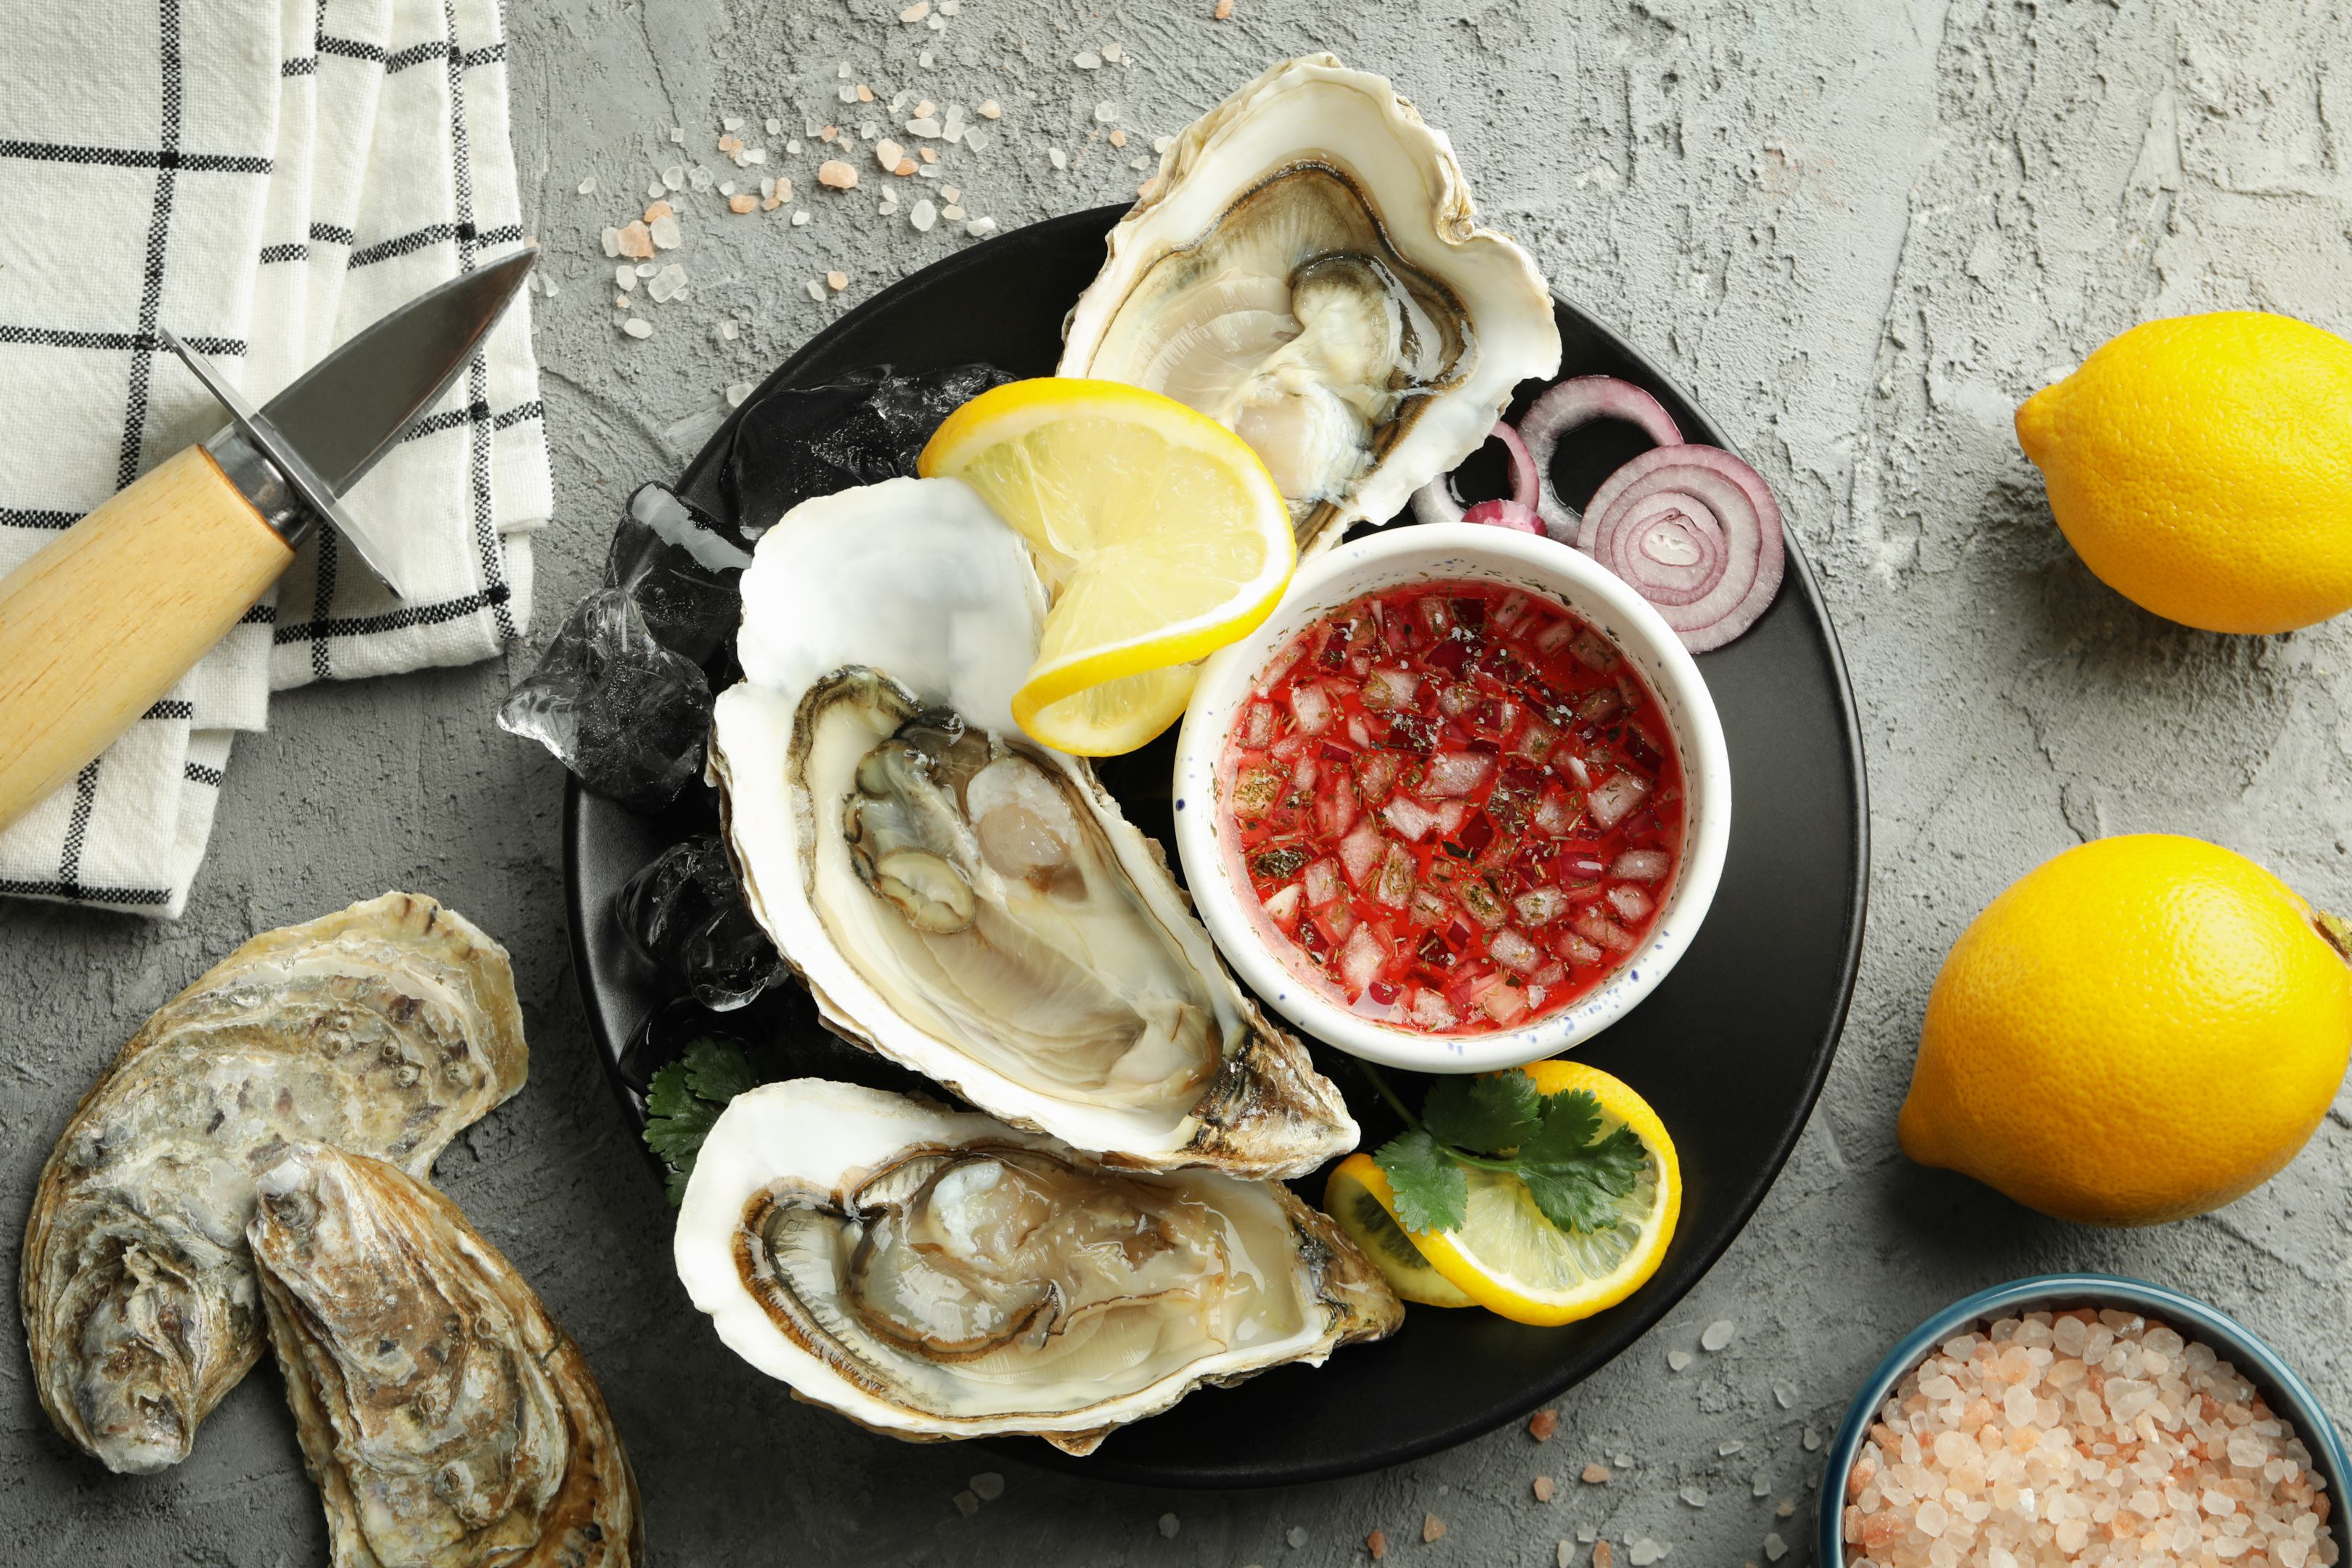 An excellent oyster food idea.